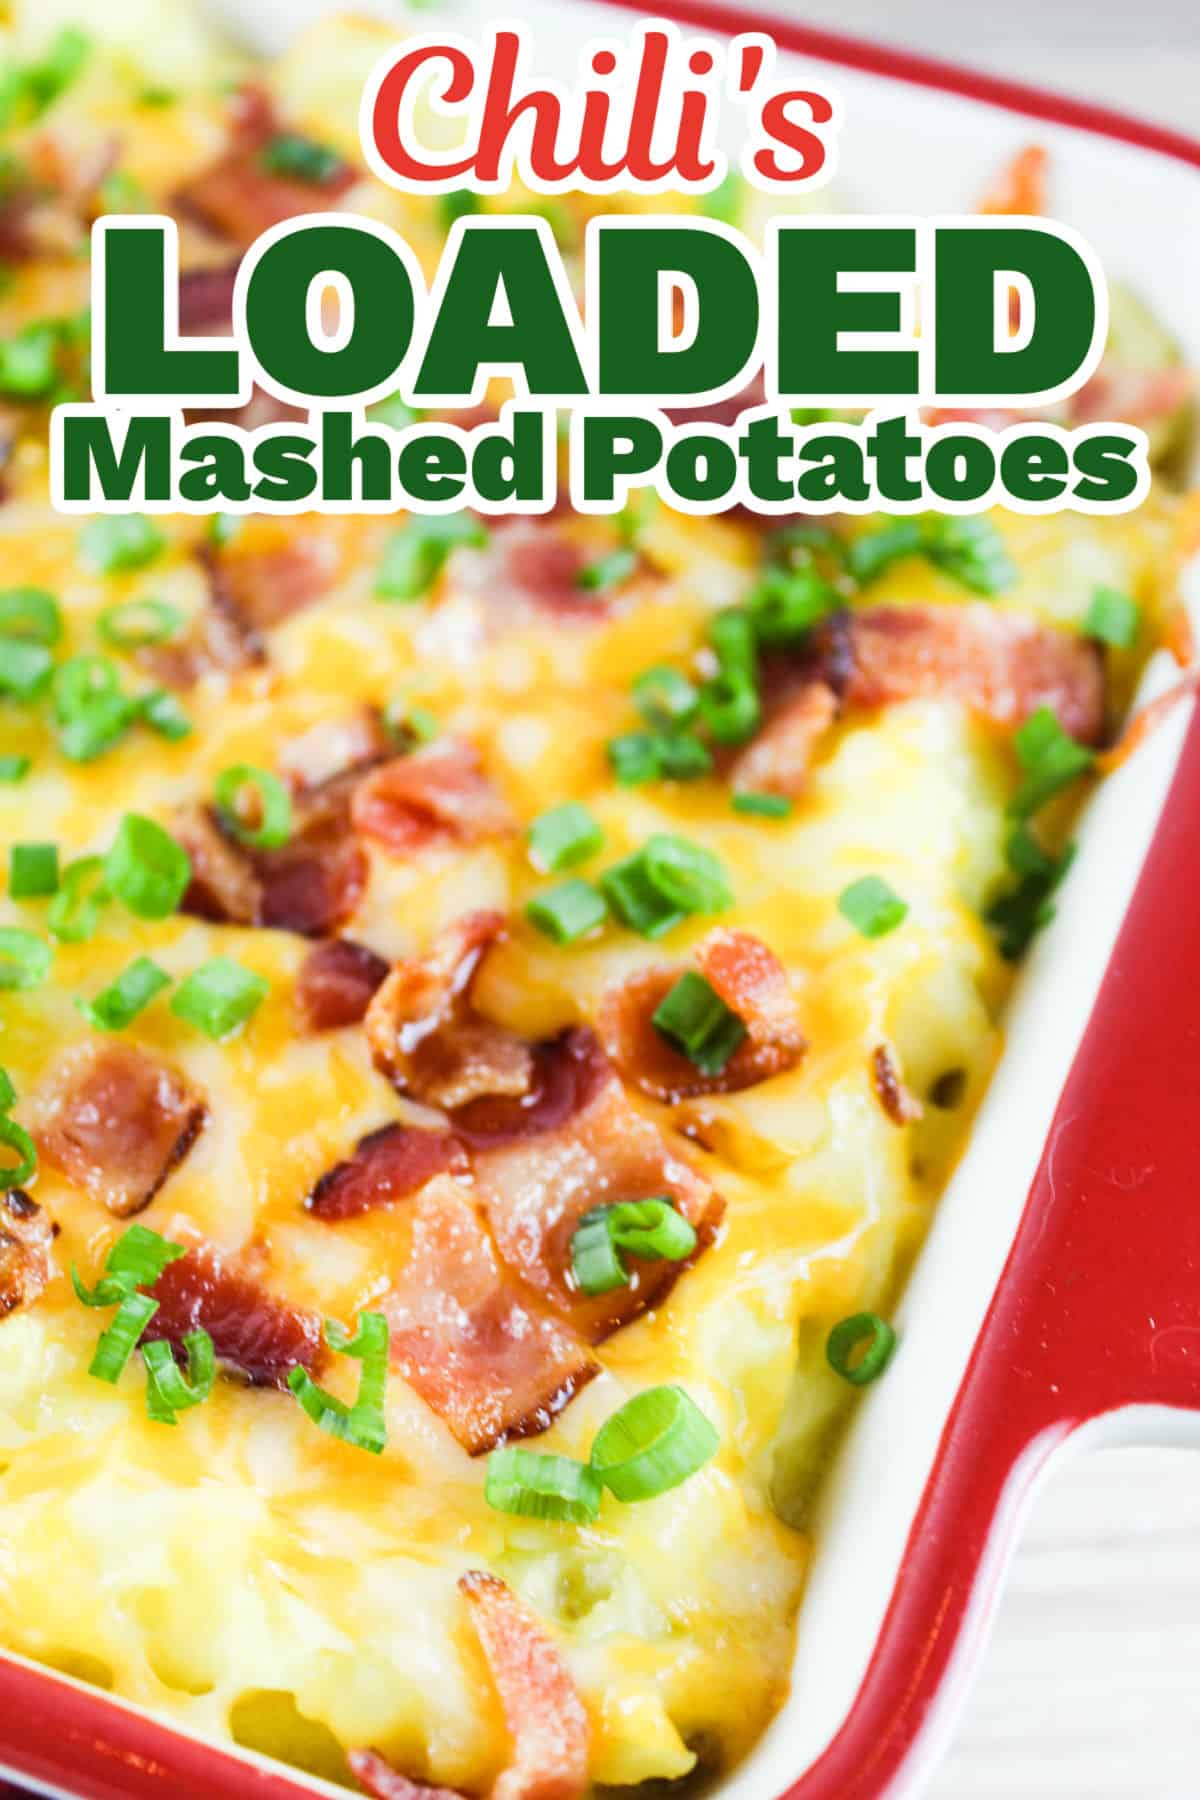 Chili's Loaded Mashed Potatoes are simple to make and bring the cheesy goodness into your home! Delicious, slightly buttery mashed potatoes are the perfect side dish and topped with melted cheese, diced meaty bacon and crunchy bits of scallions.  via @foodhussy